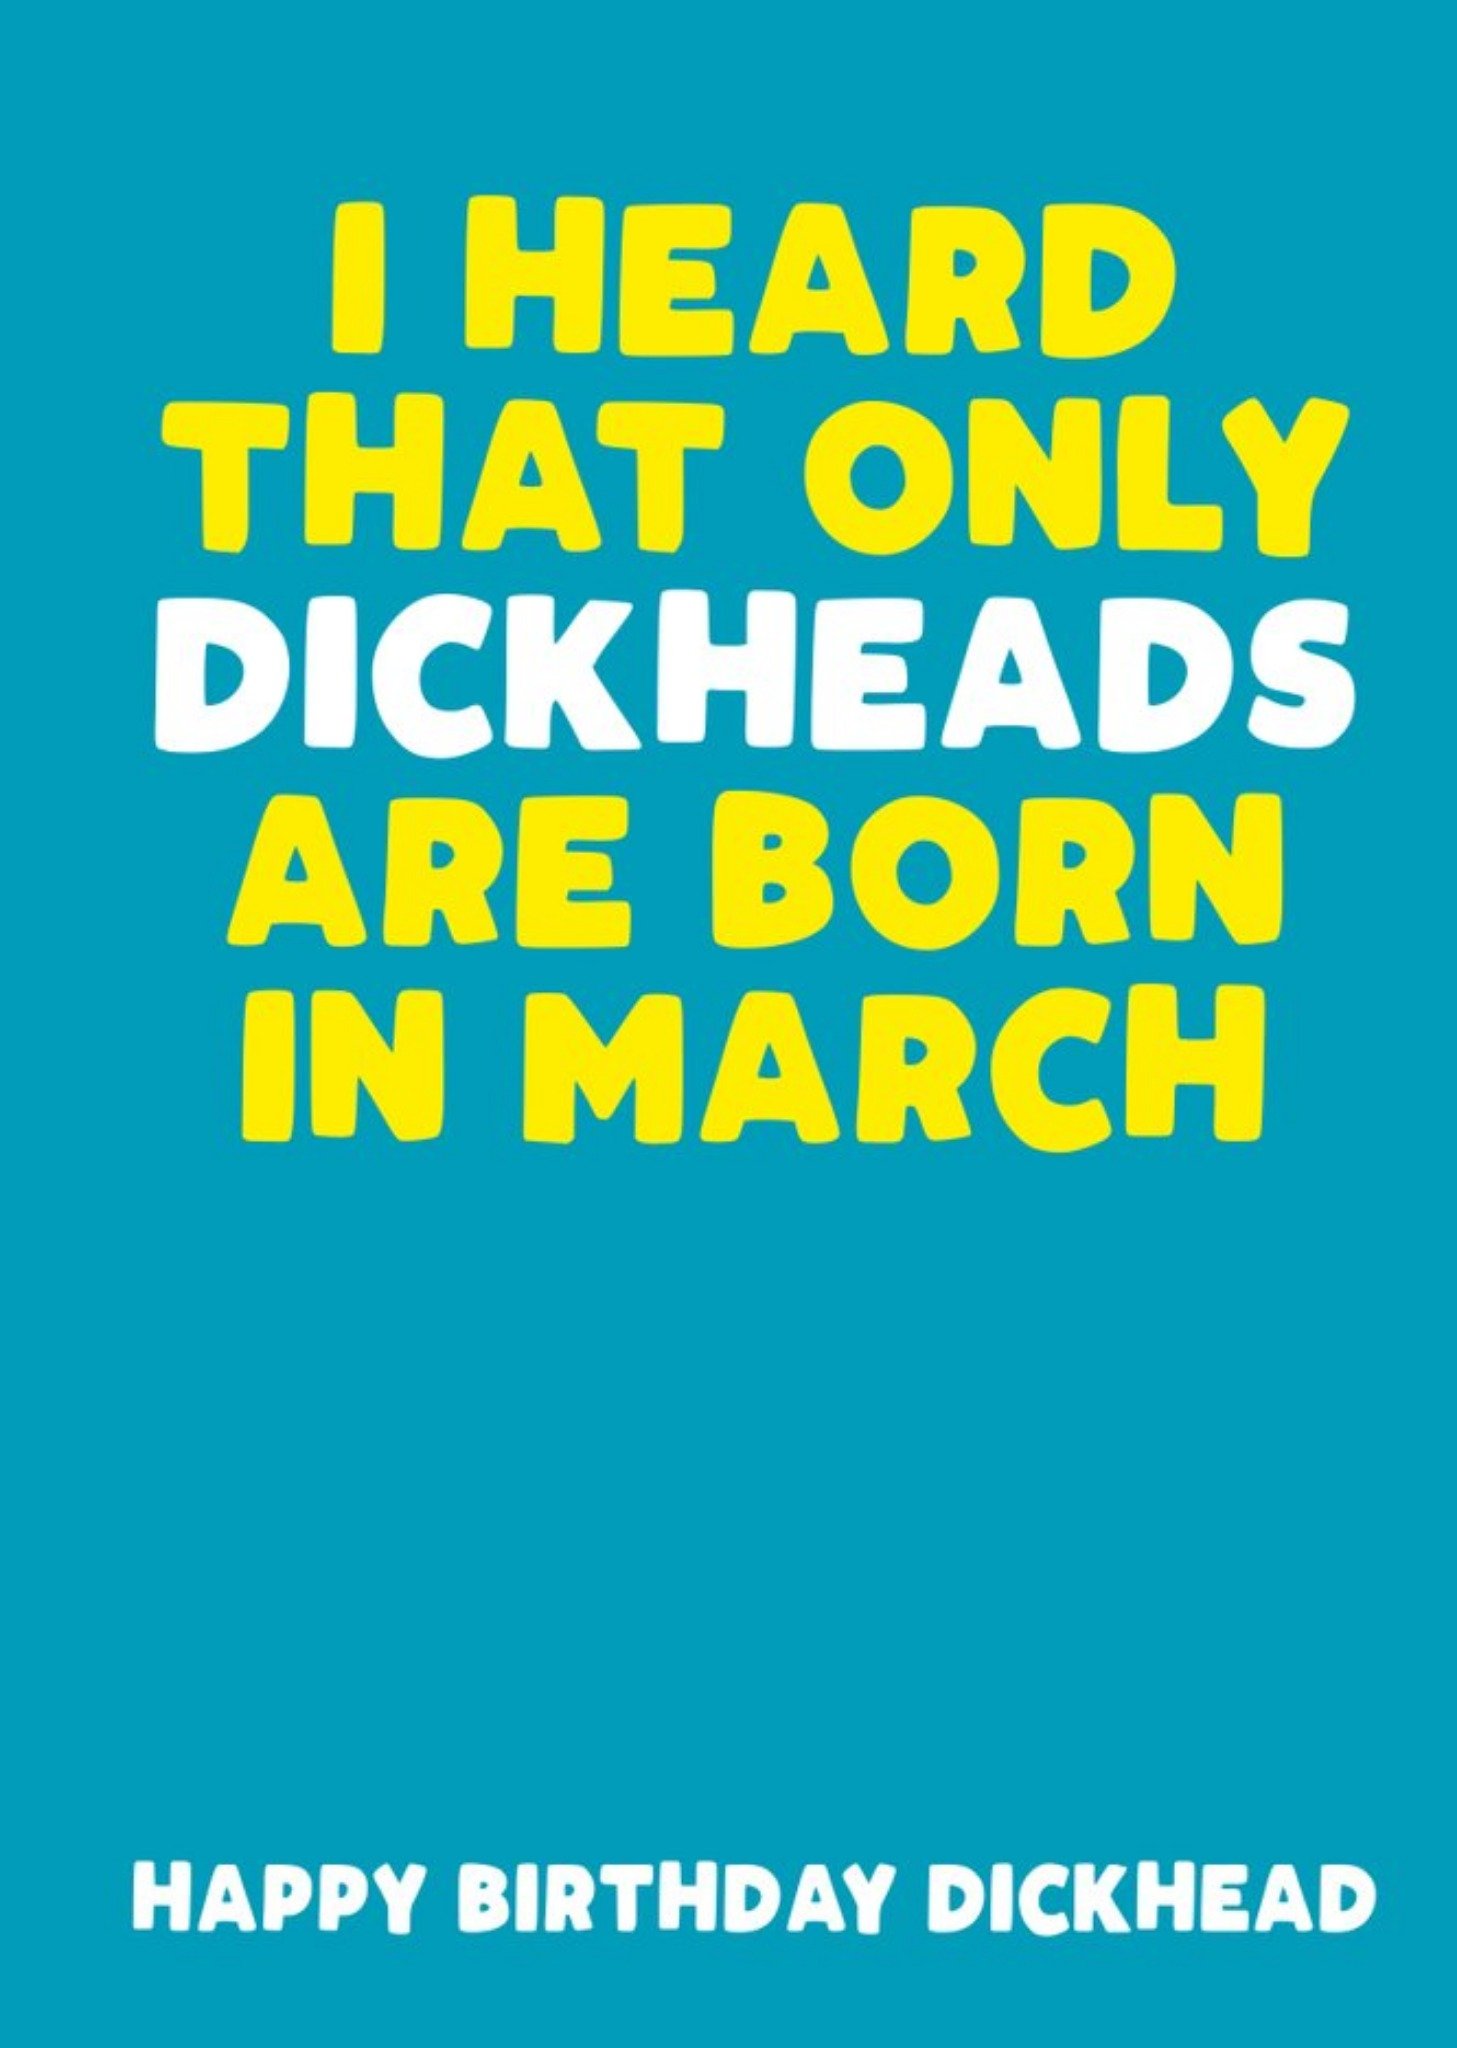 Moonpig I Heard That Only Dickheads Are Born In March Funny Card, Large